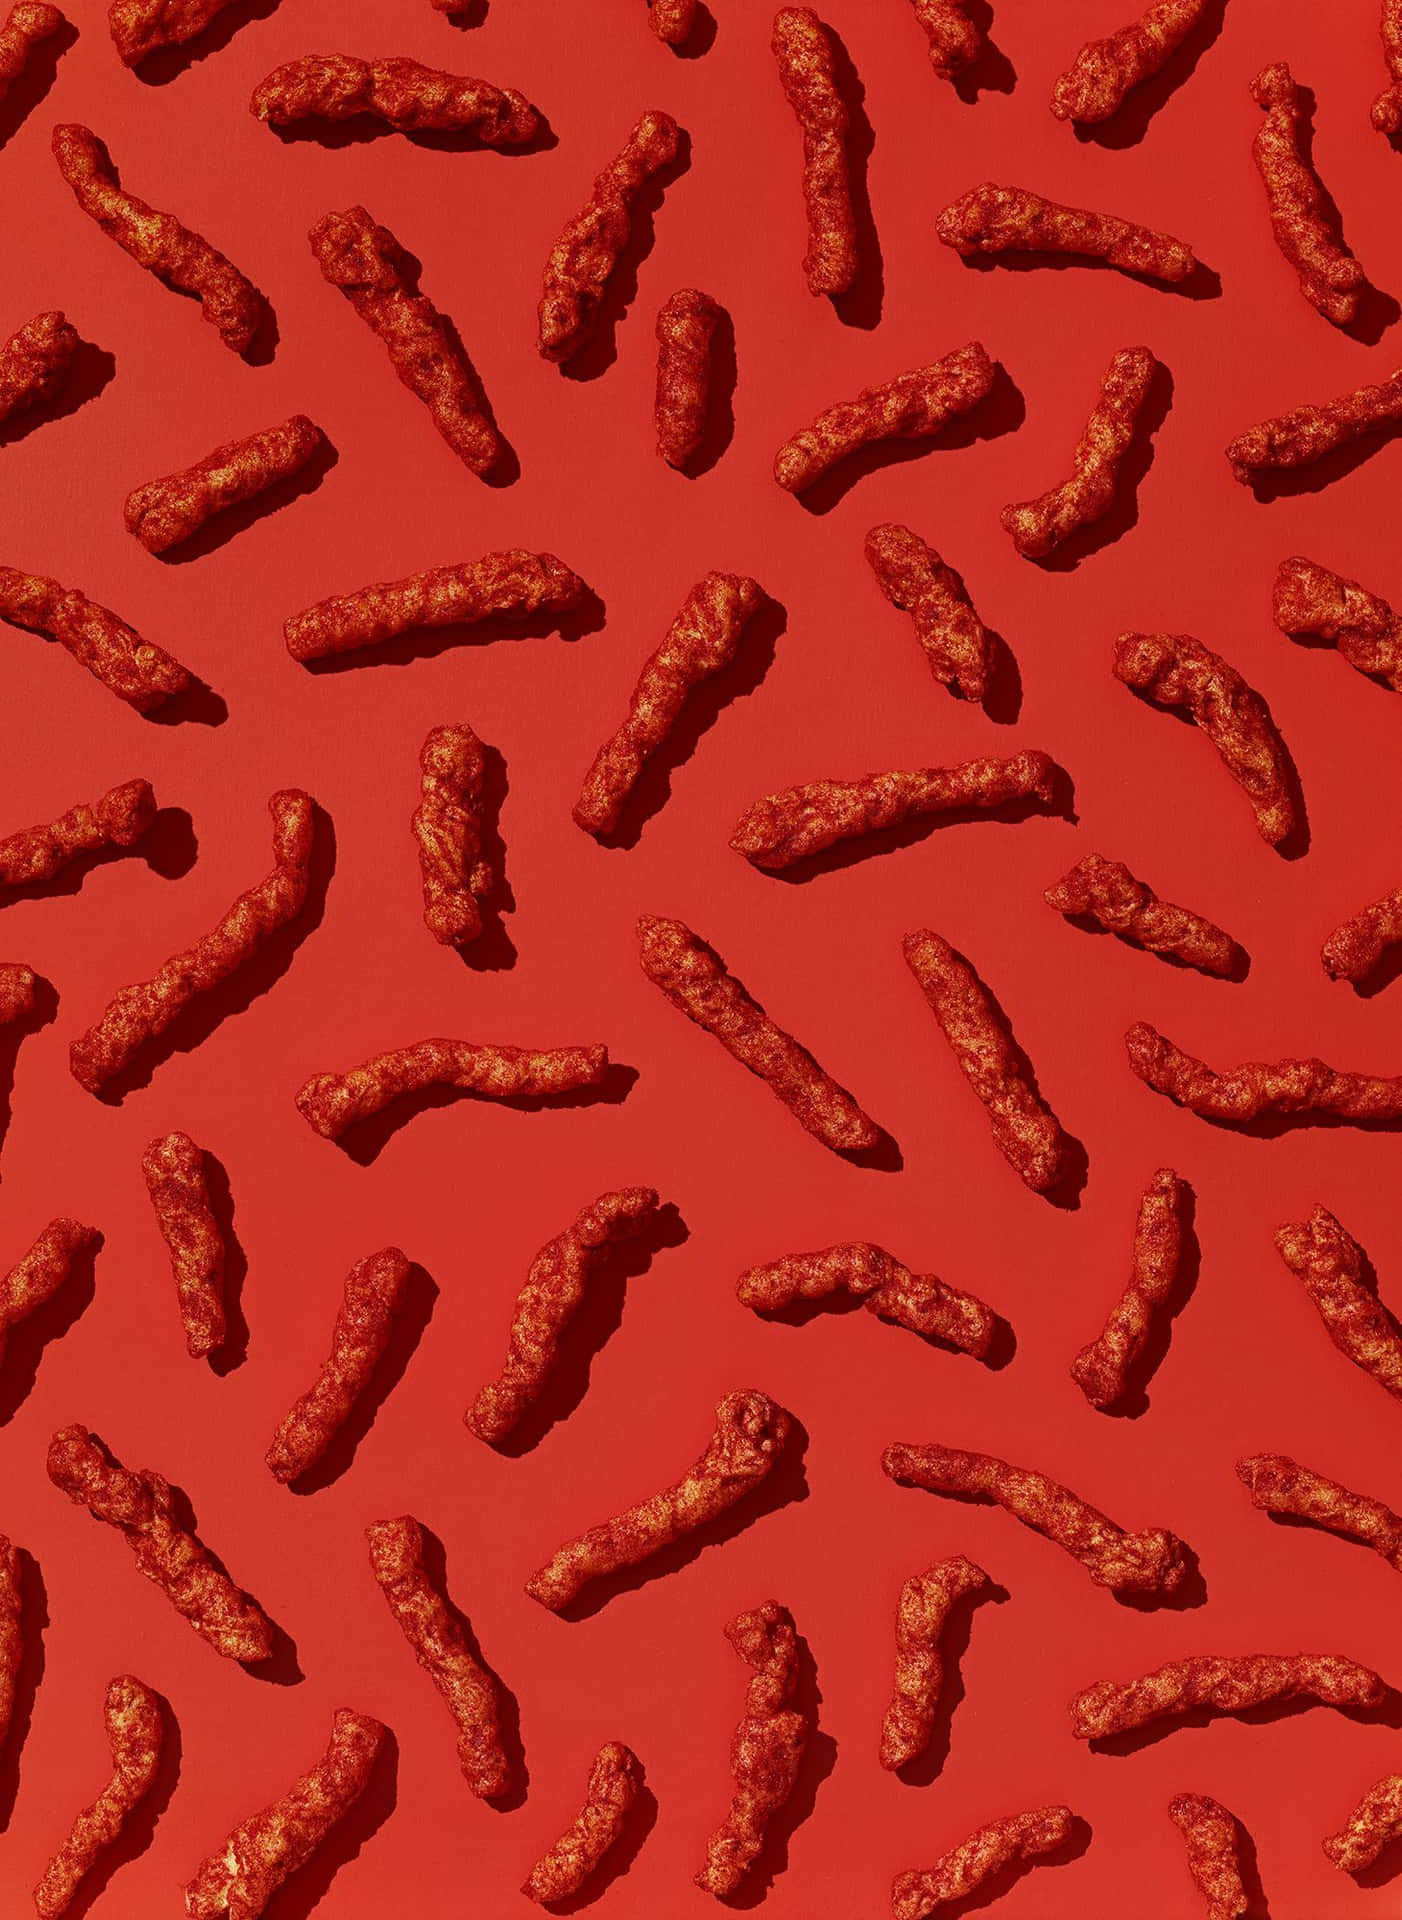 A red background with an array of red cheetos on it - Cheetos